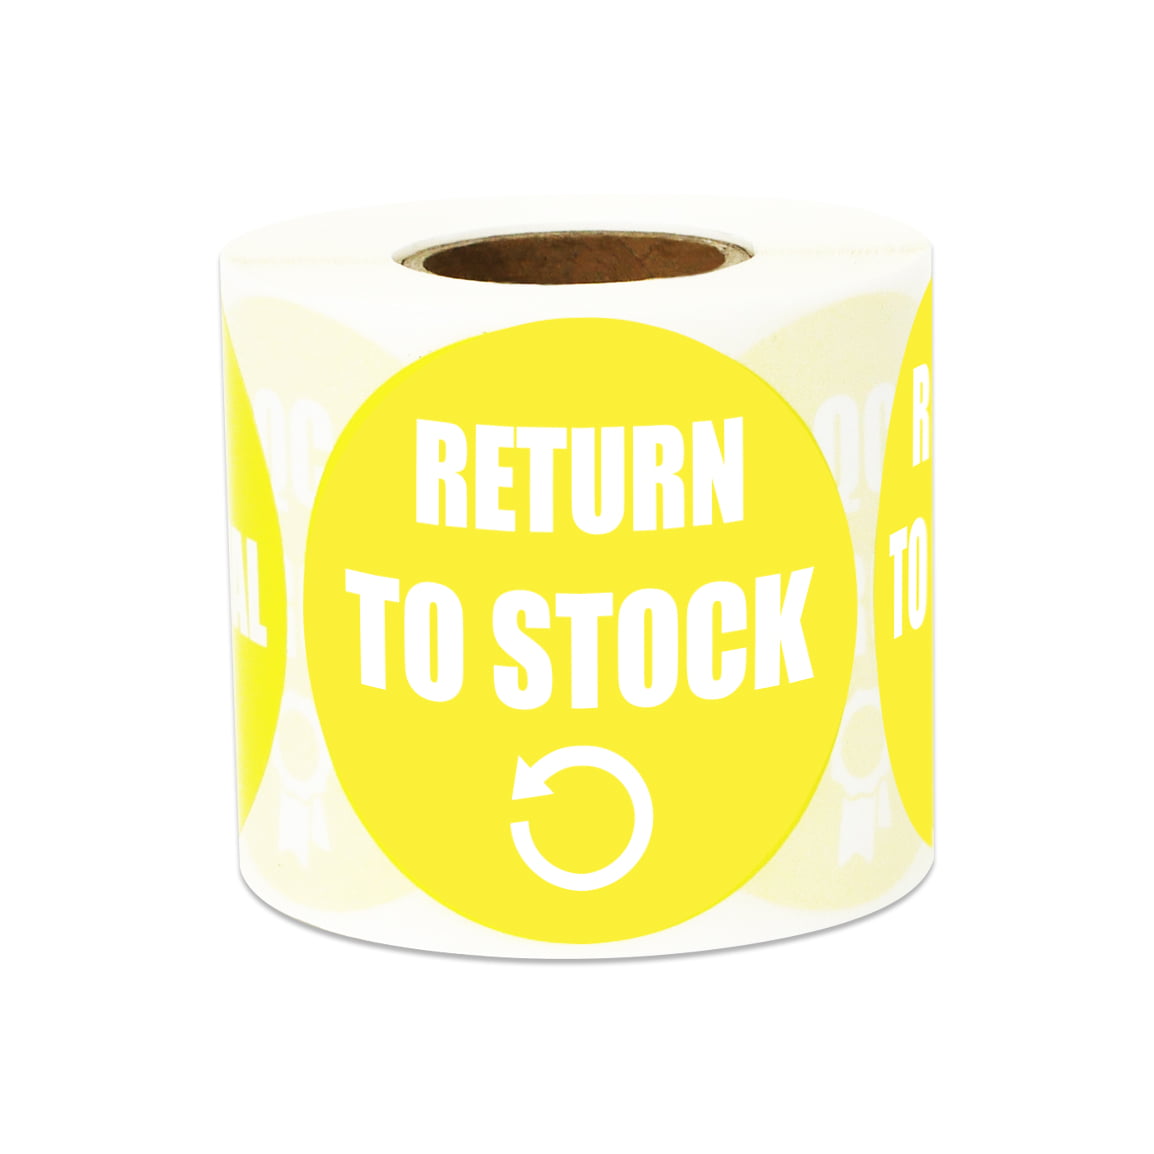 2"x2", 10PK Return to Stock Stickers Inventory Warehouse Count Round Labels 